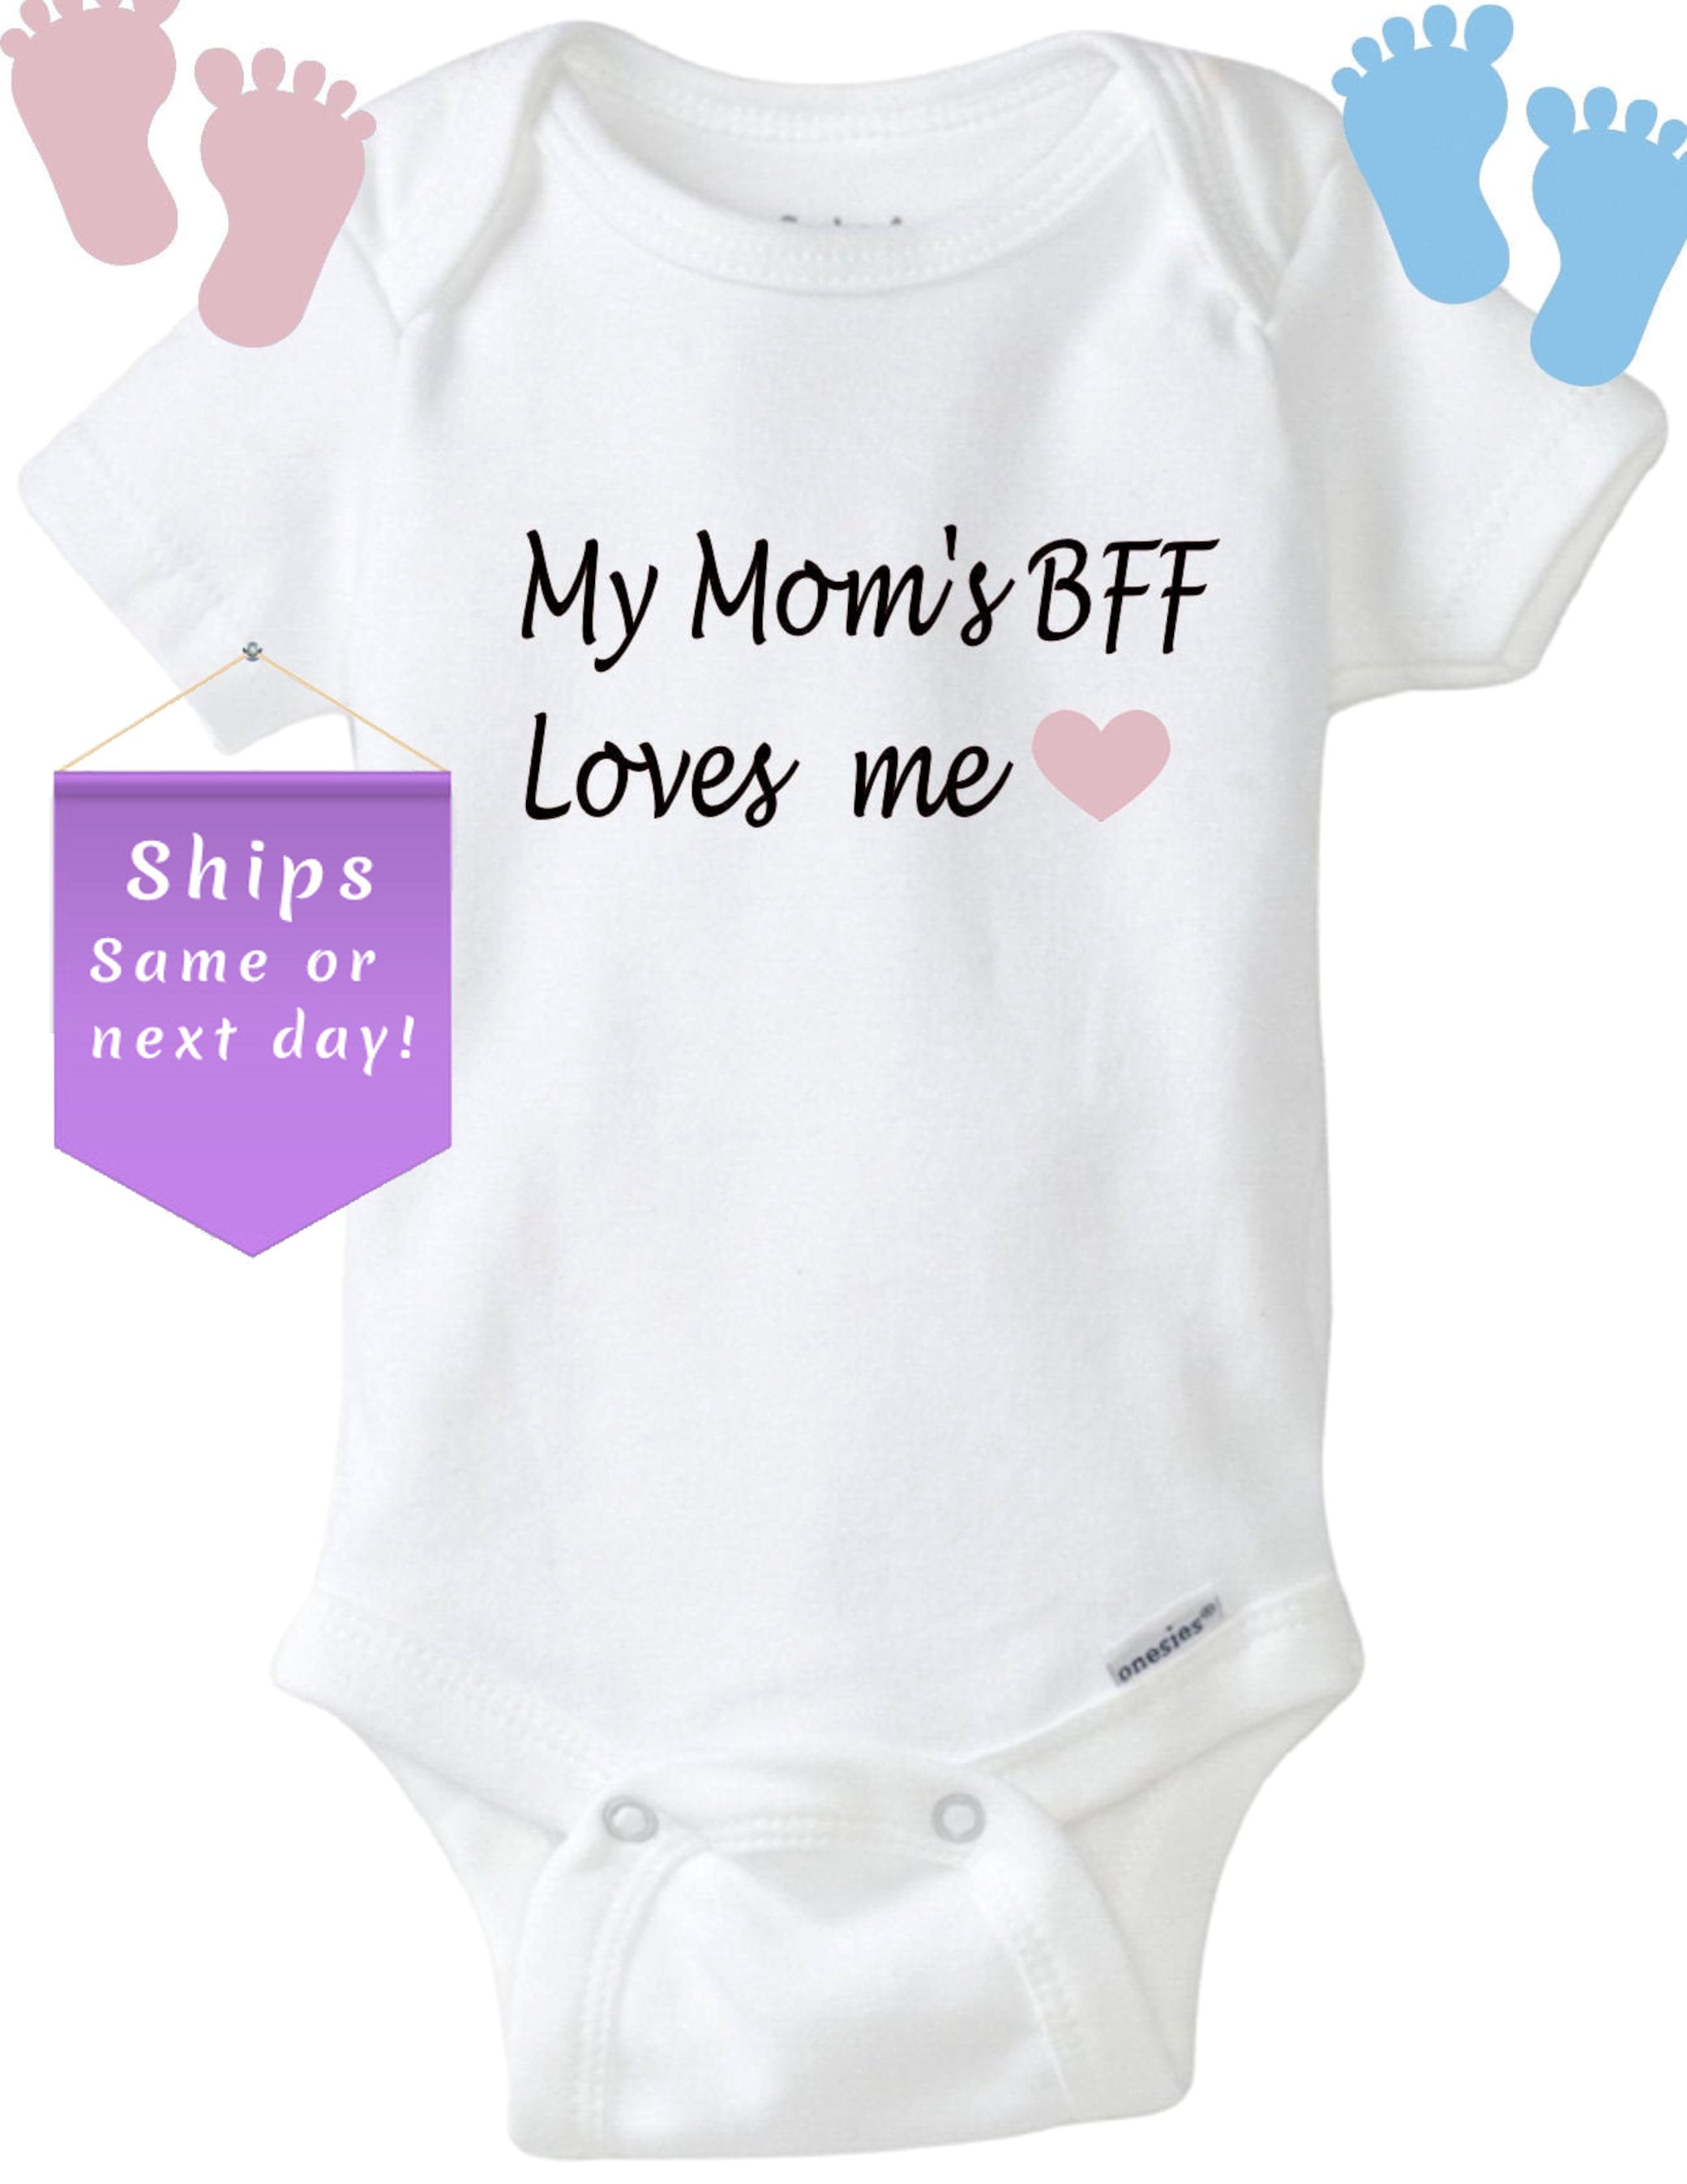 Baby onesie Baby short sleeve one piece Baby gift Mother/'s day gift for her baby Baby bodysuit Born to be Baby